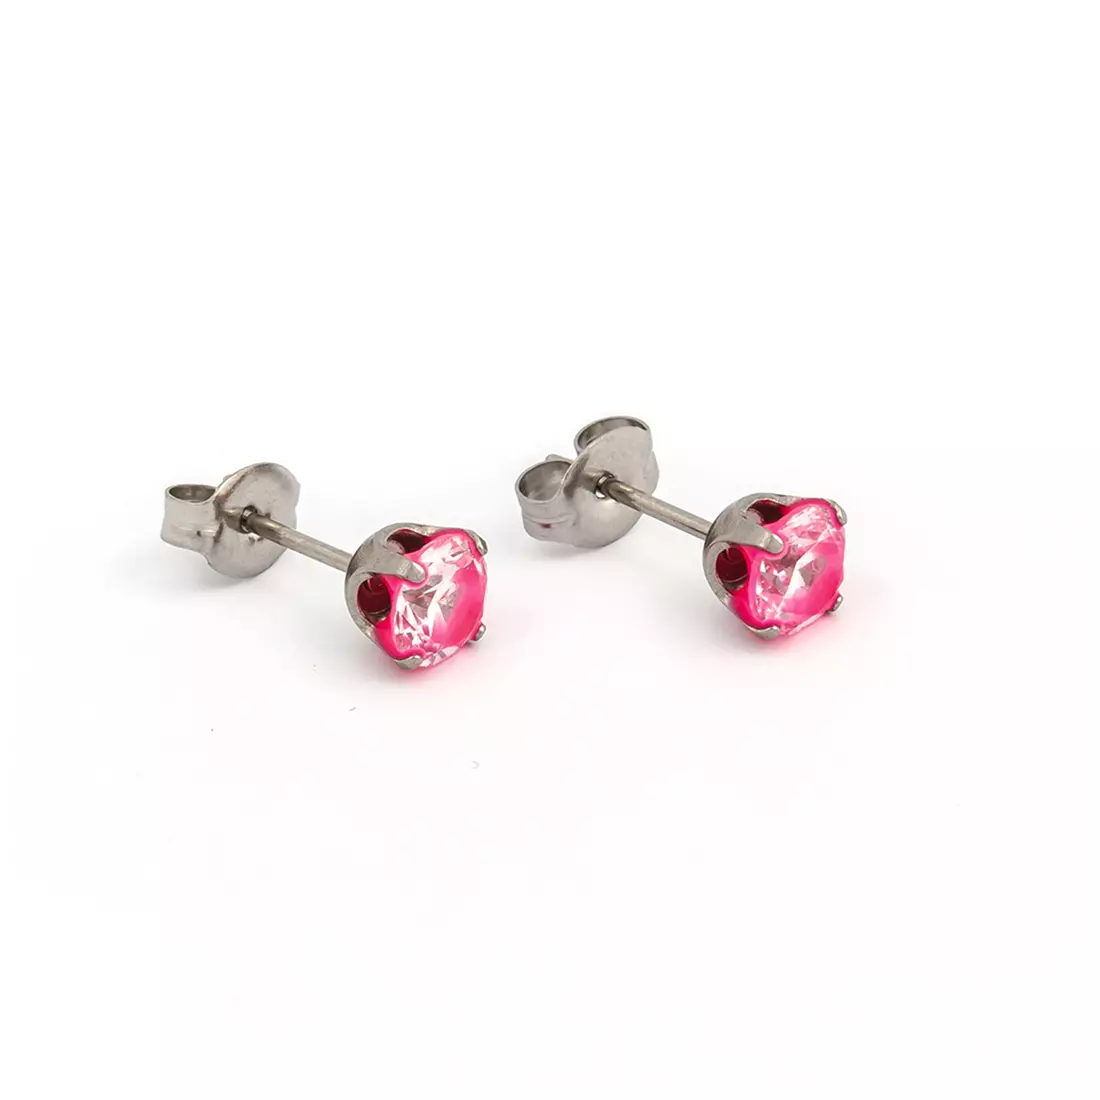 5MM Cubic Zirconia Neon Hot Pink Allergy Free Stainless Steel Ear Studs | Ideal for everyday wear